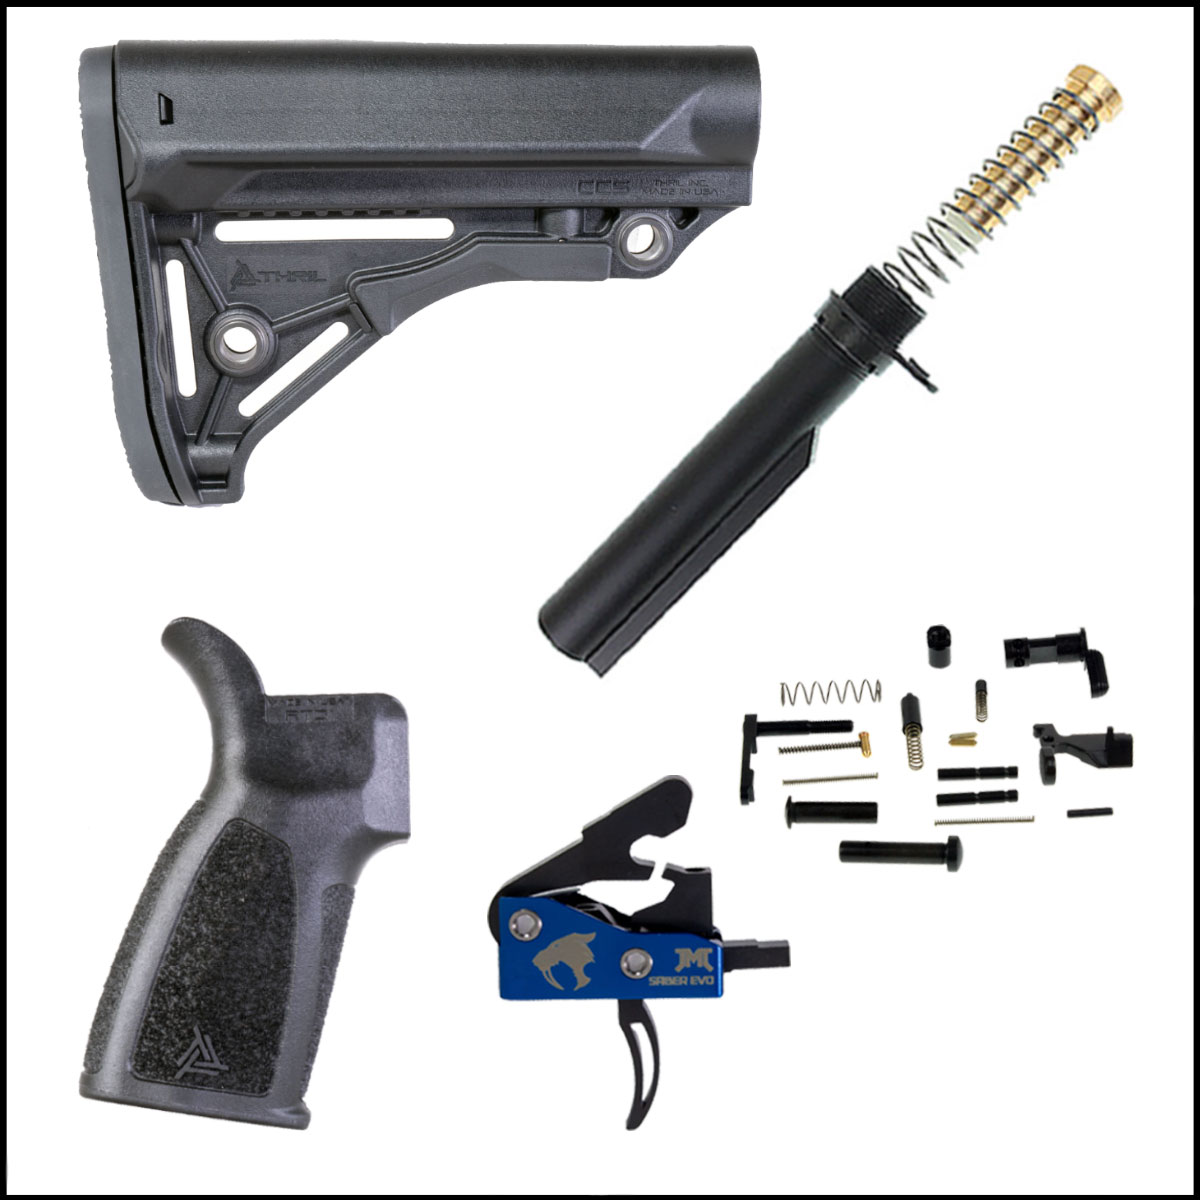 Finish Your Lower Kit: THRIL Combat Competition Stock + Mil-Spec Buffer Tube + Recoil Spring + End Plate + Carbine Recoil Buffer + Thril Rugged Tactical Grip + Lower Parts Kit + Tactical Saber Single Stage Drop in Trigger